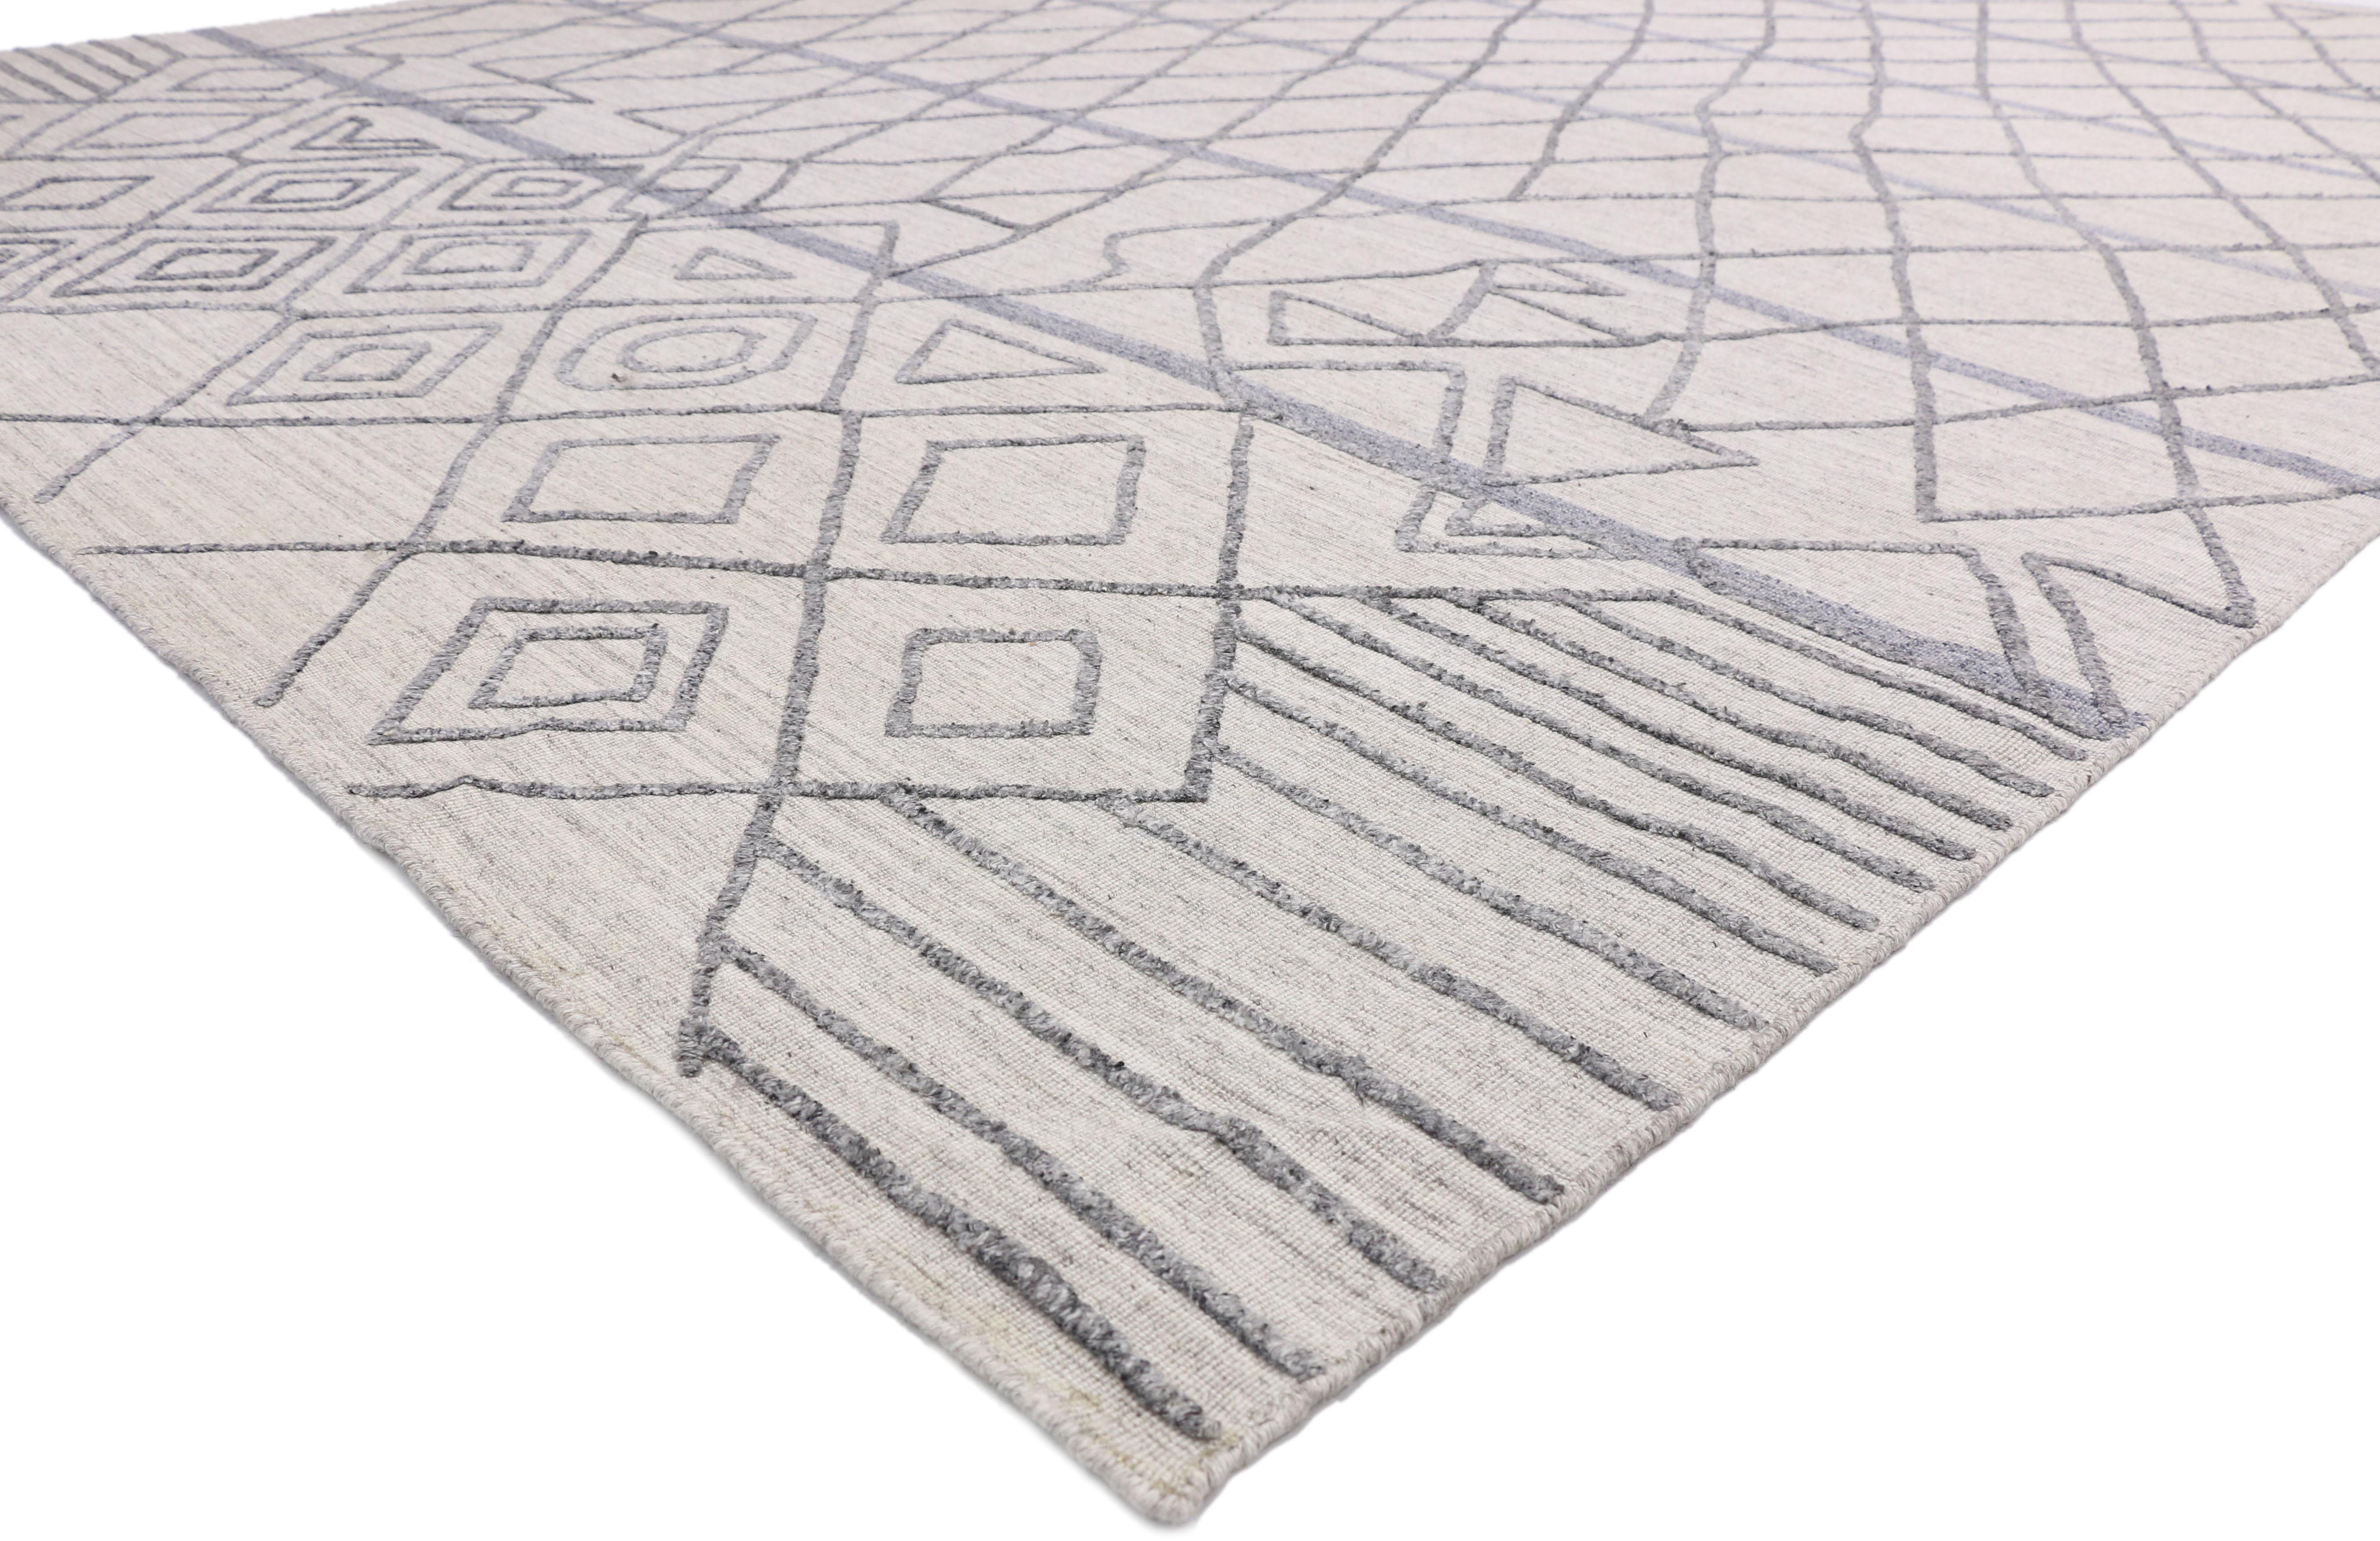 30414 New Gray Modern Textured Rug with Moroccan Trellis Raised Design. Warm hygge vibes meet tribal designs in this contemporary rug with Moroccan style. A dynamic fusion of contemporary trends and nomadic tribal traditions, this Moroccan print